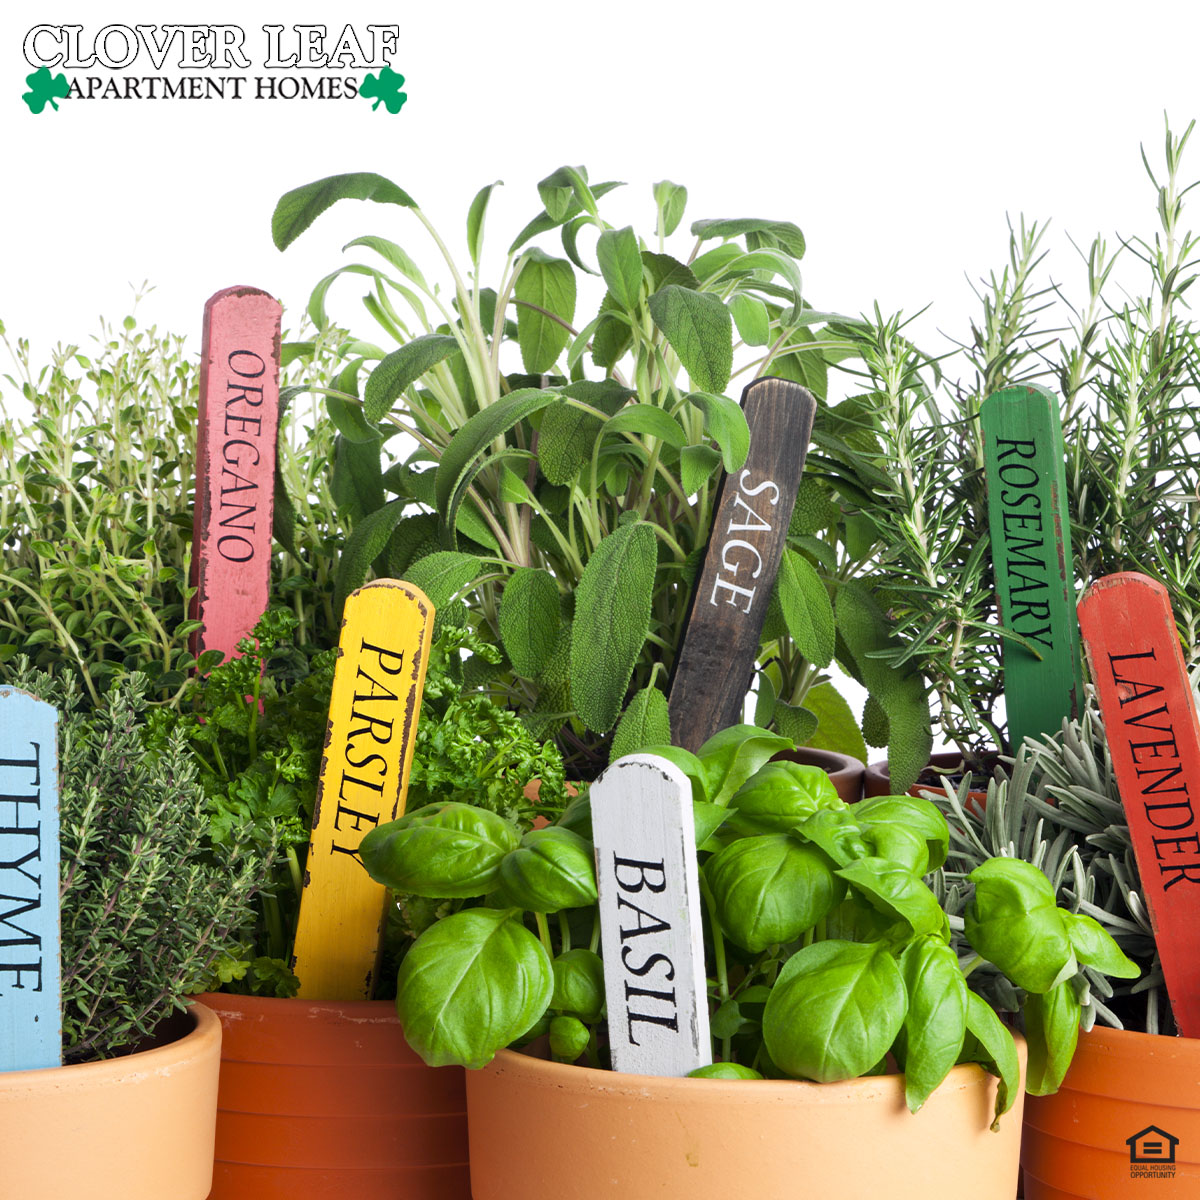 Take advantage of the #spring weather and grow your own herbs on your patio or balcony this season. 🪴🌤 Ready to see more of our amenities? 👉 cloverleafal.com